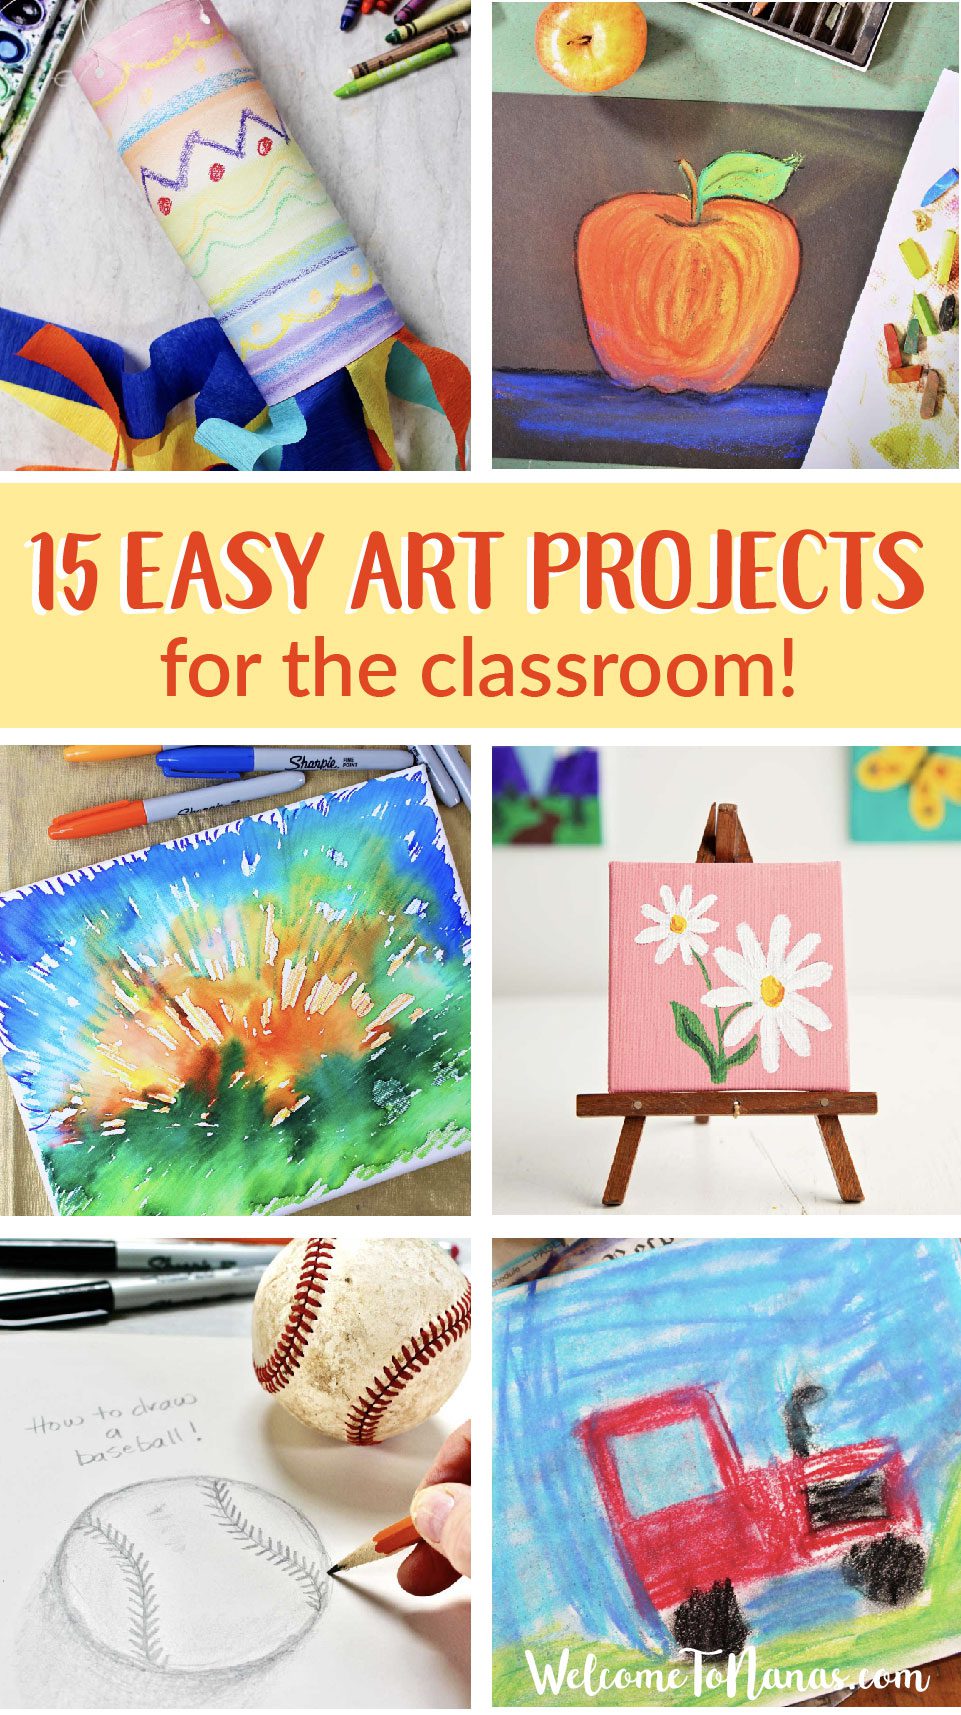 Pictures of art projects that can be created in a classroom at school.